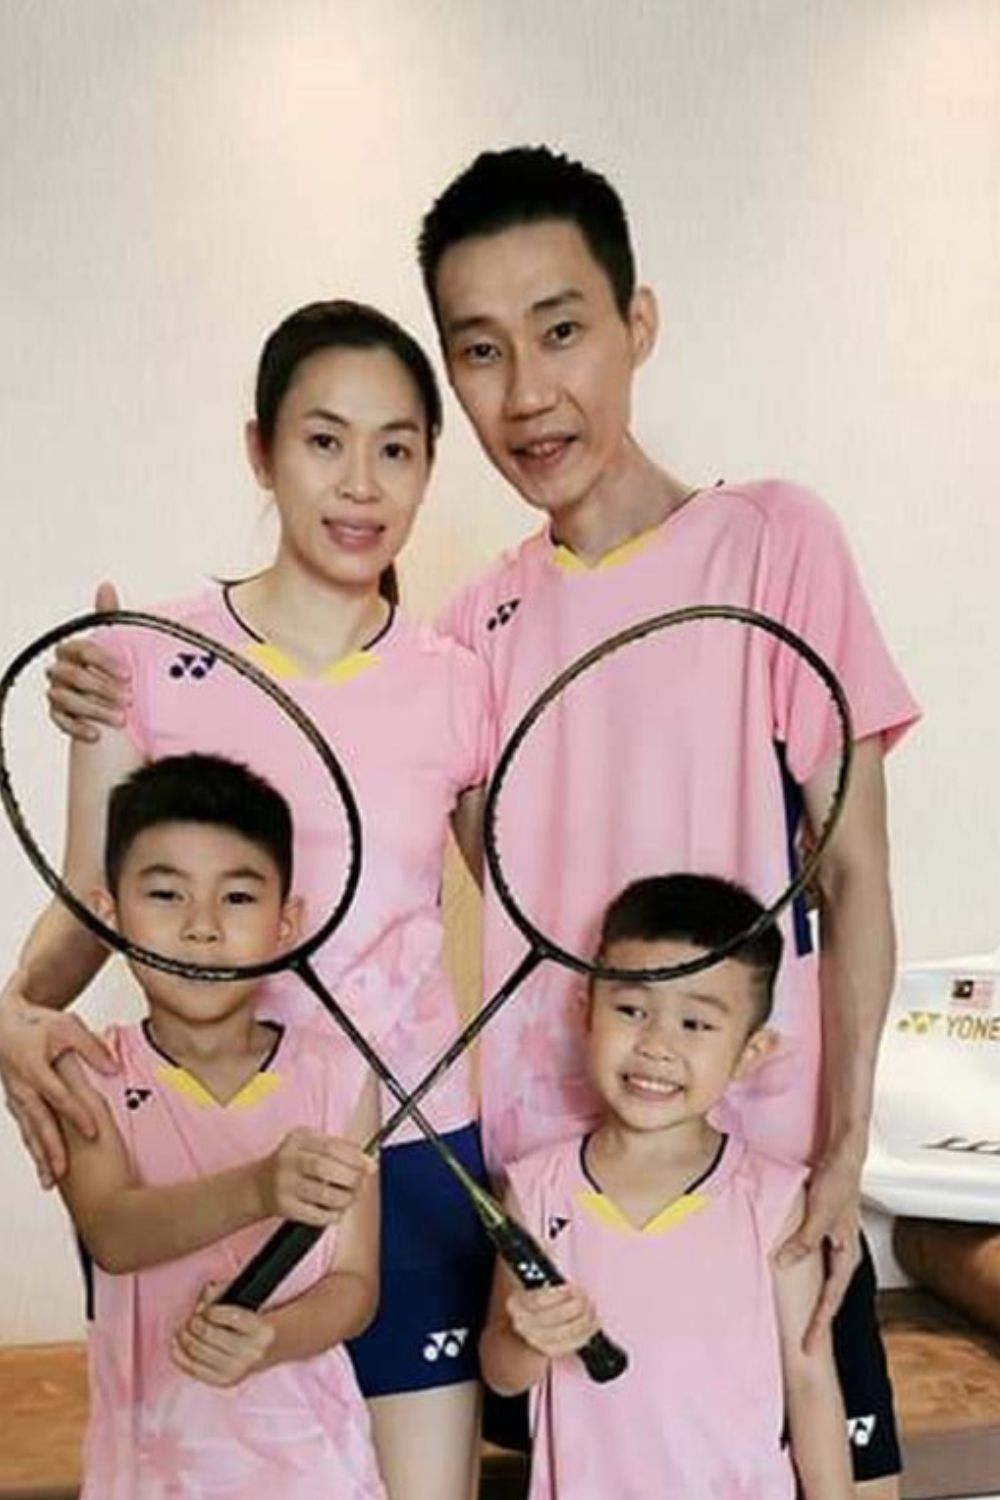 Lee Chong Wei With His Family.